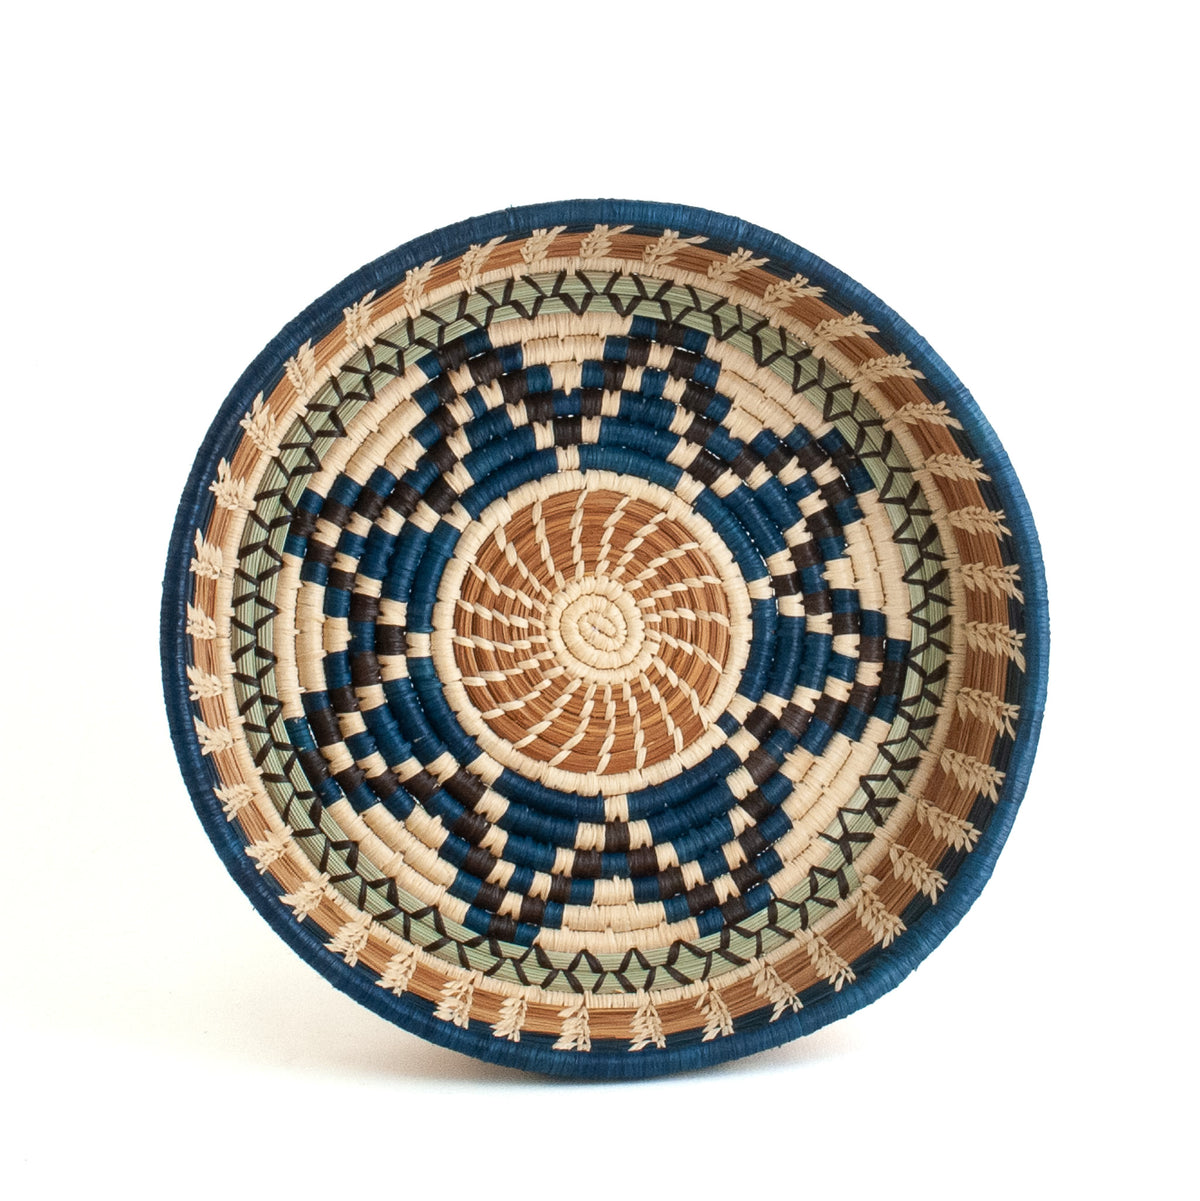 Pine needle basket with central star pattern